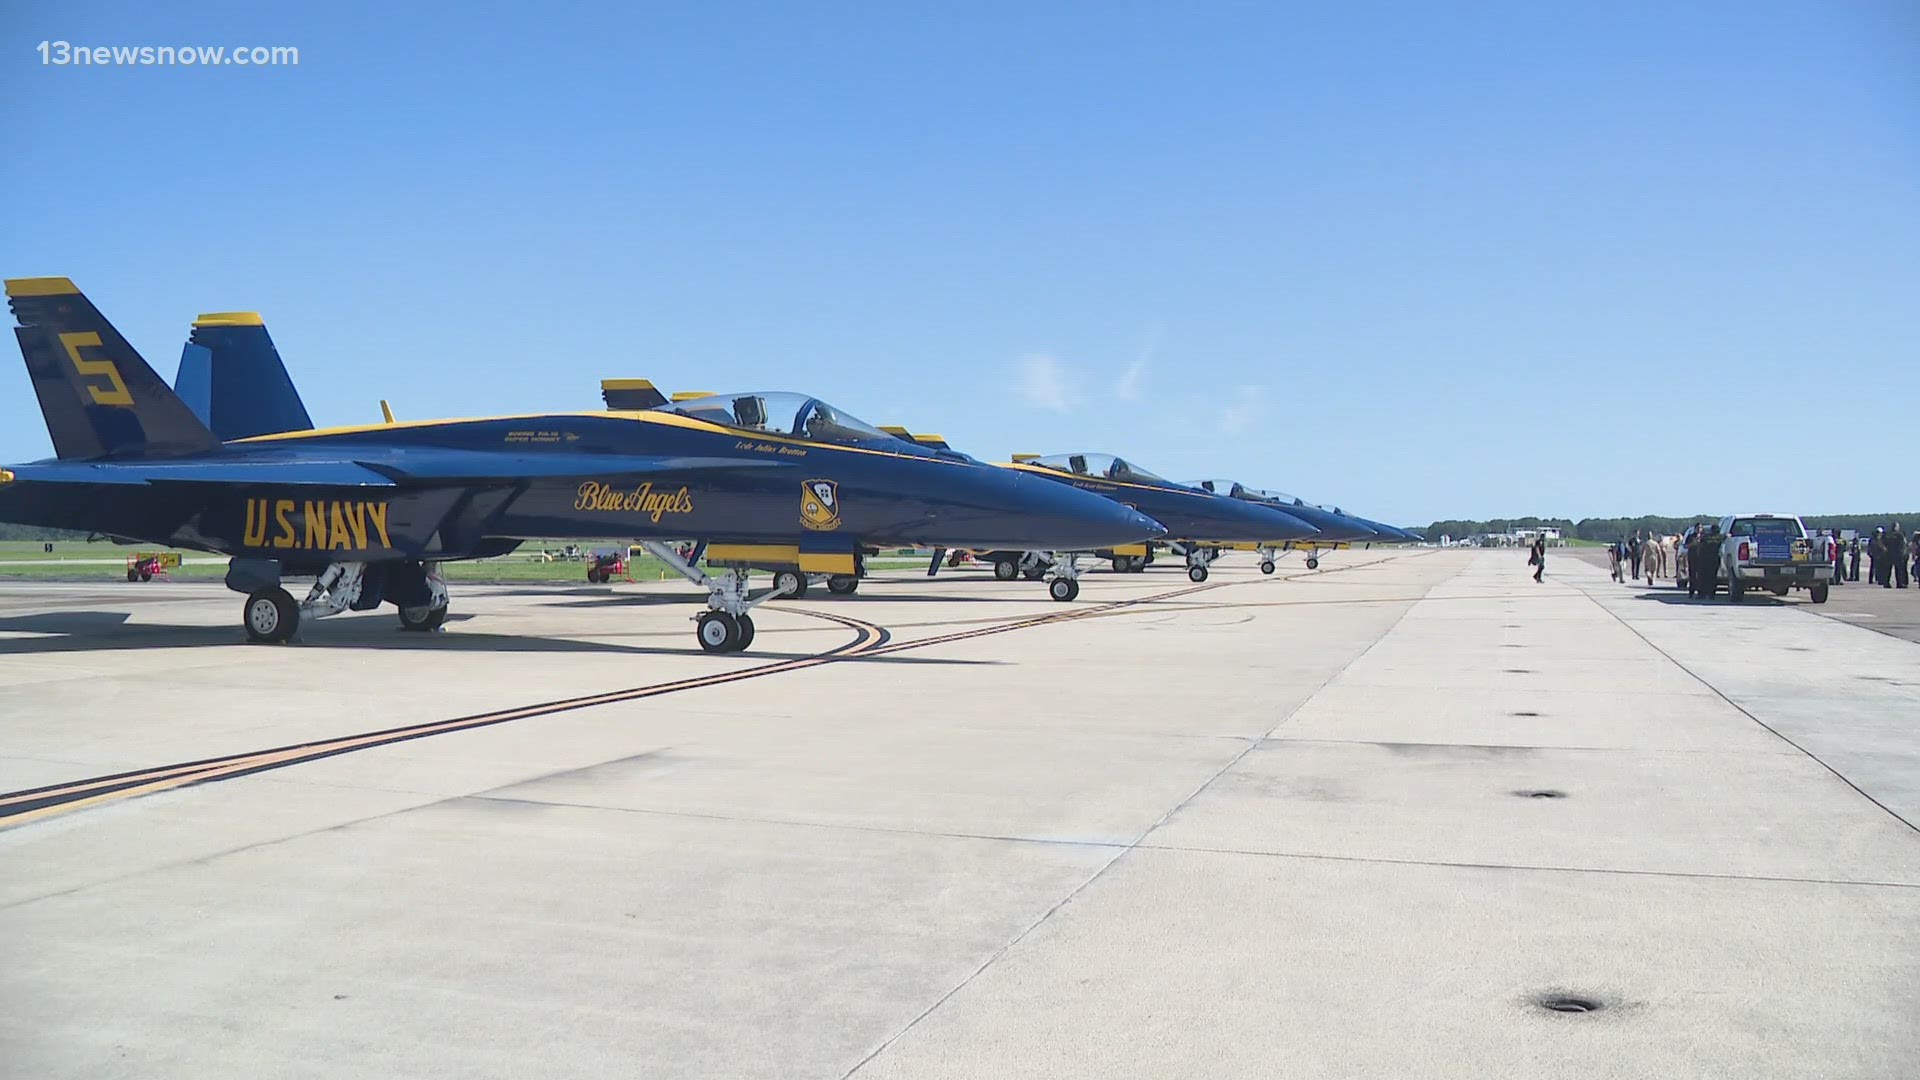 The Oceana Air Show is back this weekend! And once again, the featured attraction will be the U.S. Navy flight demonstration team, the Blue Angels.